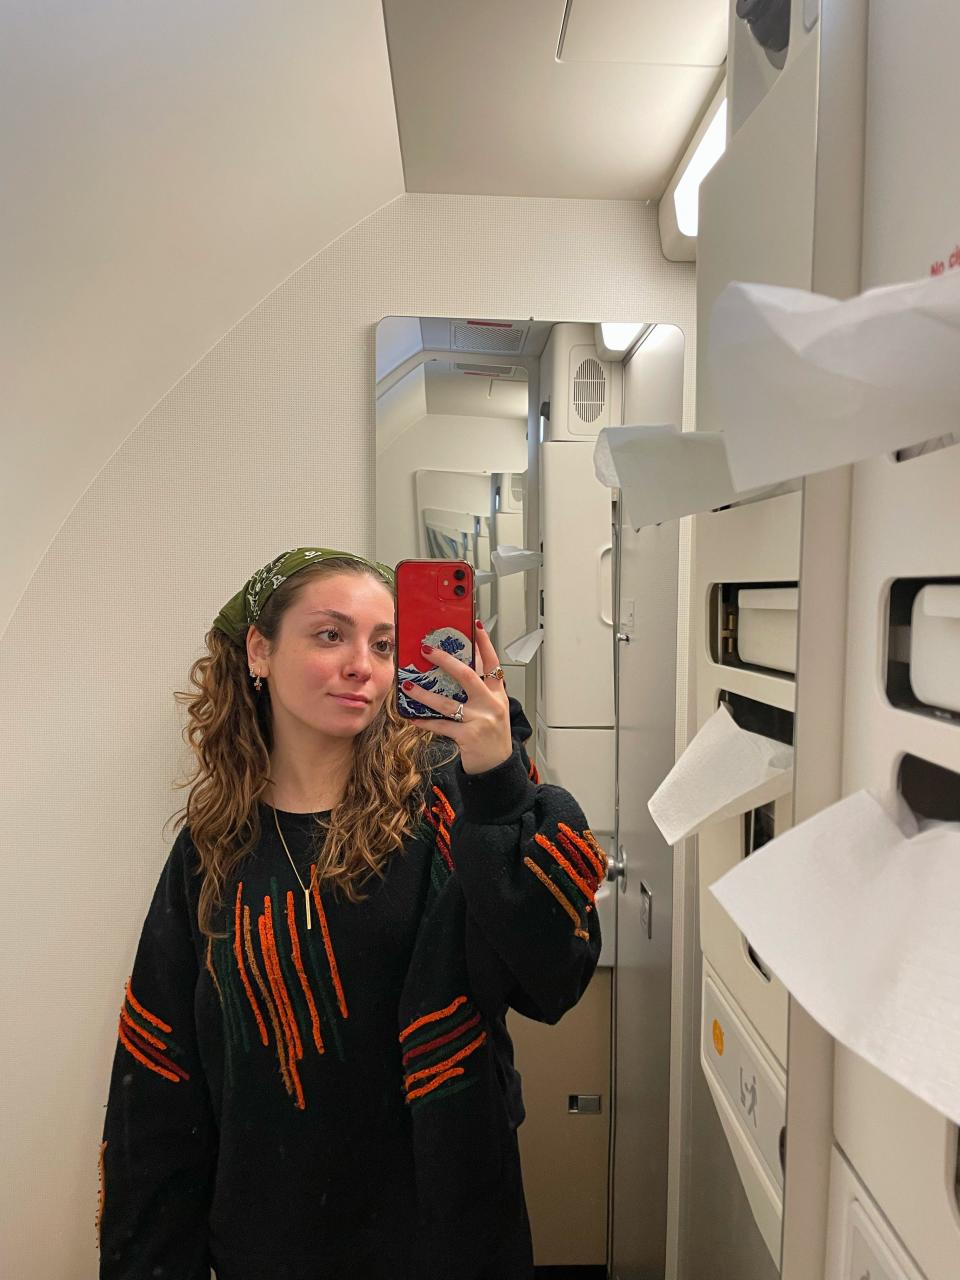 The author taking a photo in one of the bathroom's mirror Asia London Palomba PLAY Airlines review